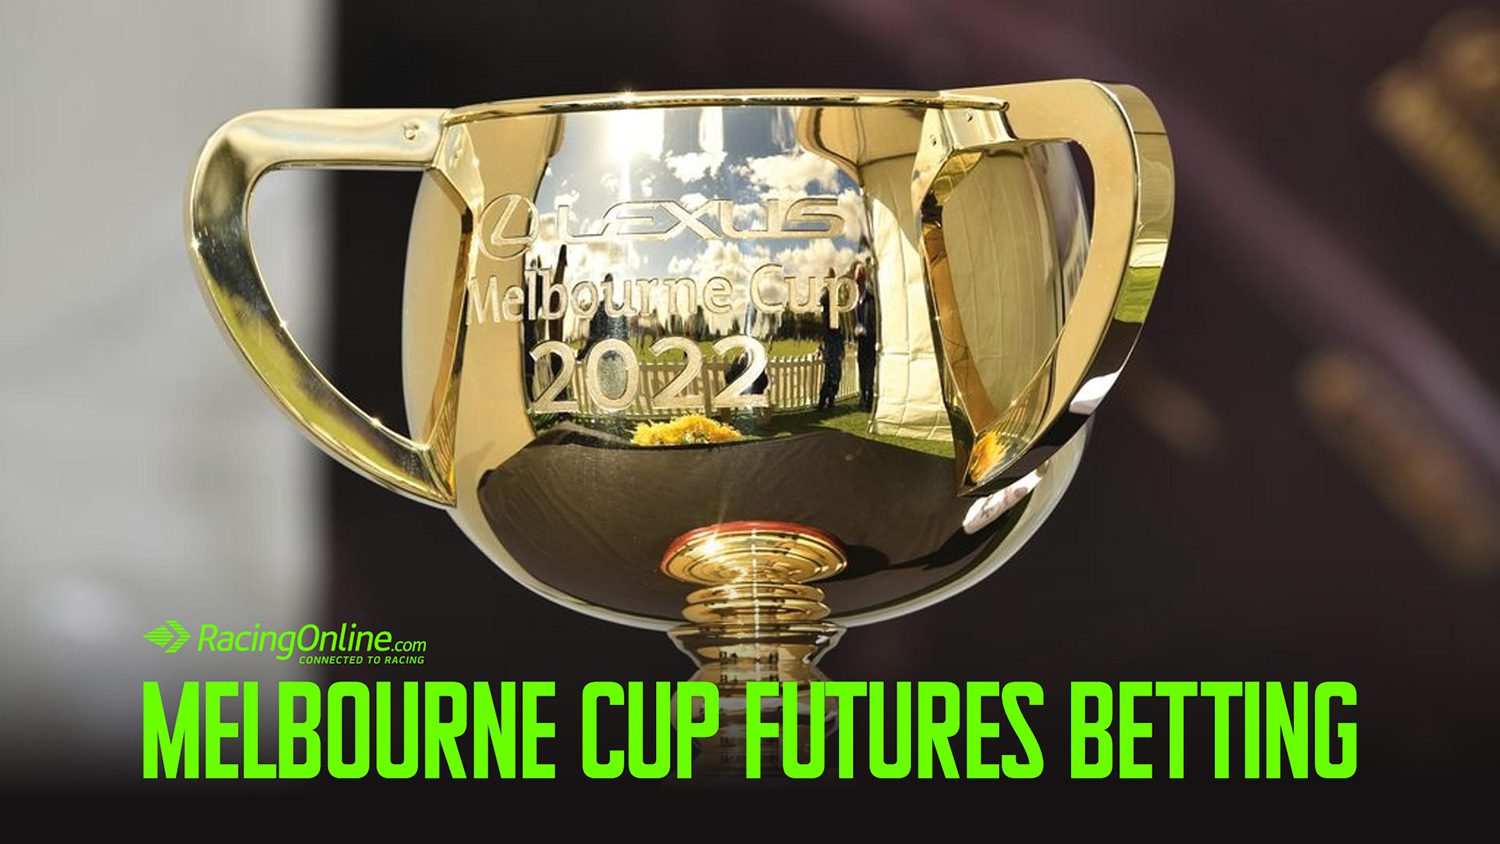 Melbourne Cup 2022 futures betting